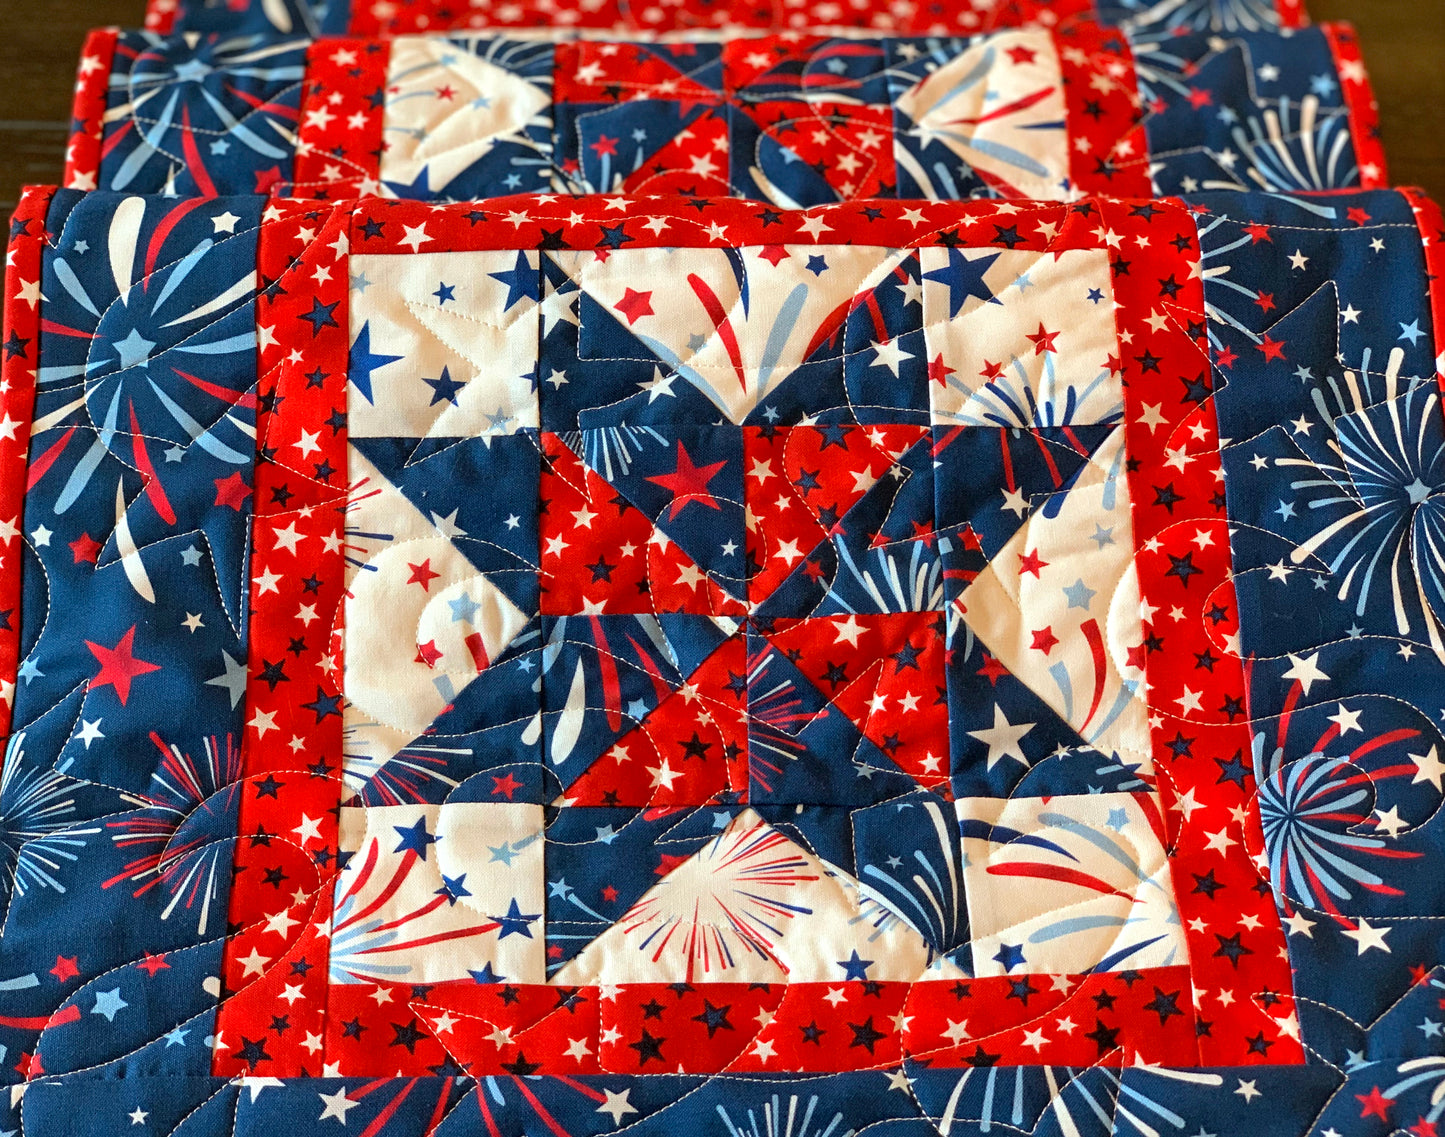 Close up of Red white and blue patriotic table runner pattern with four center star blocks that have a pinwheel in the center. The runner has red star sashing between the blocks and a blue fireworks border. 